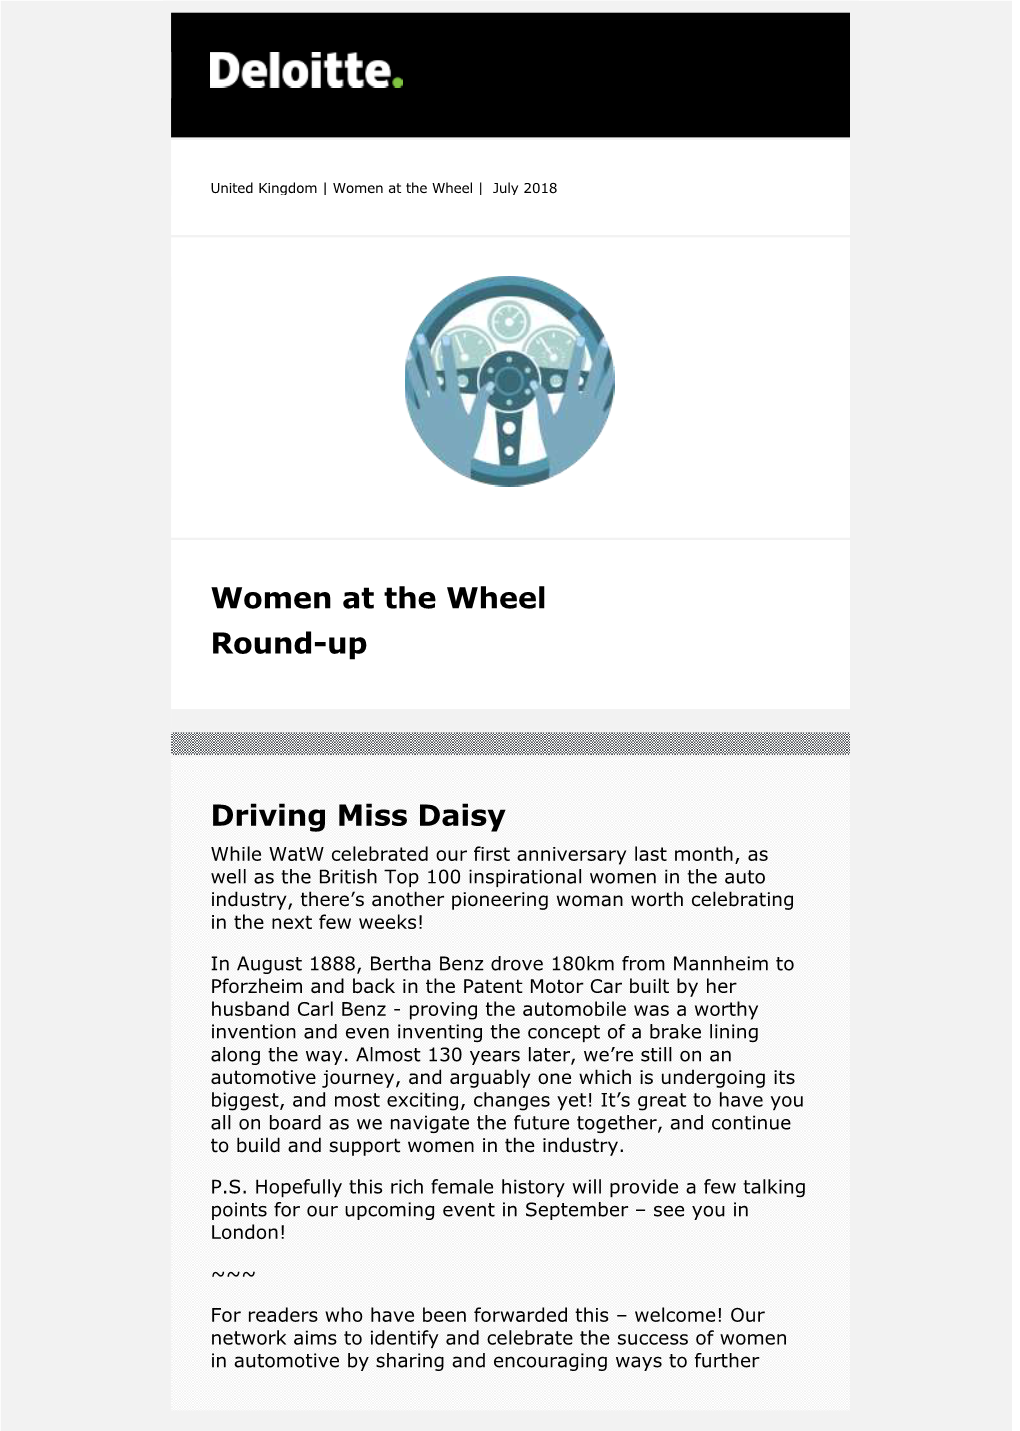 Women at the Wheel Round-Up Driving Miss Daisy